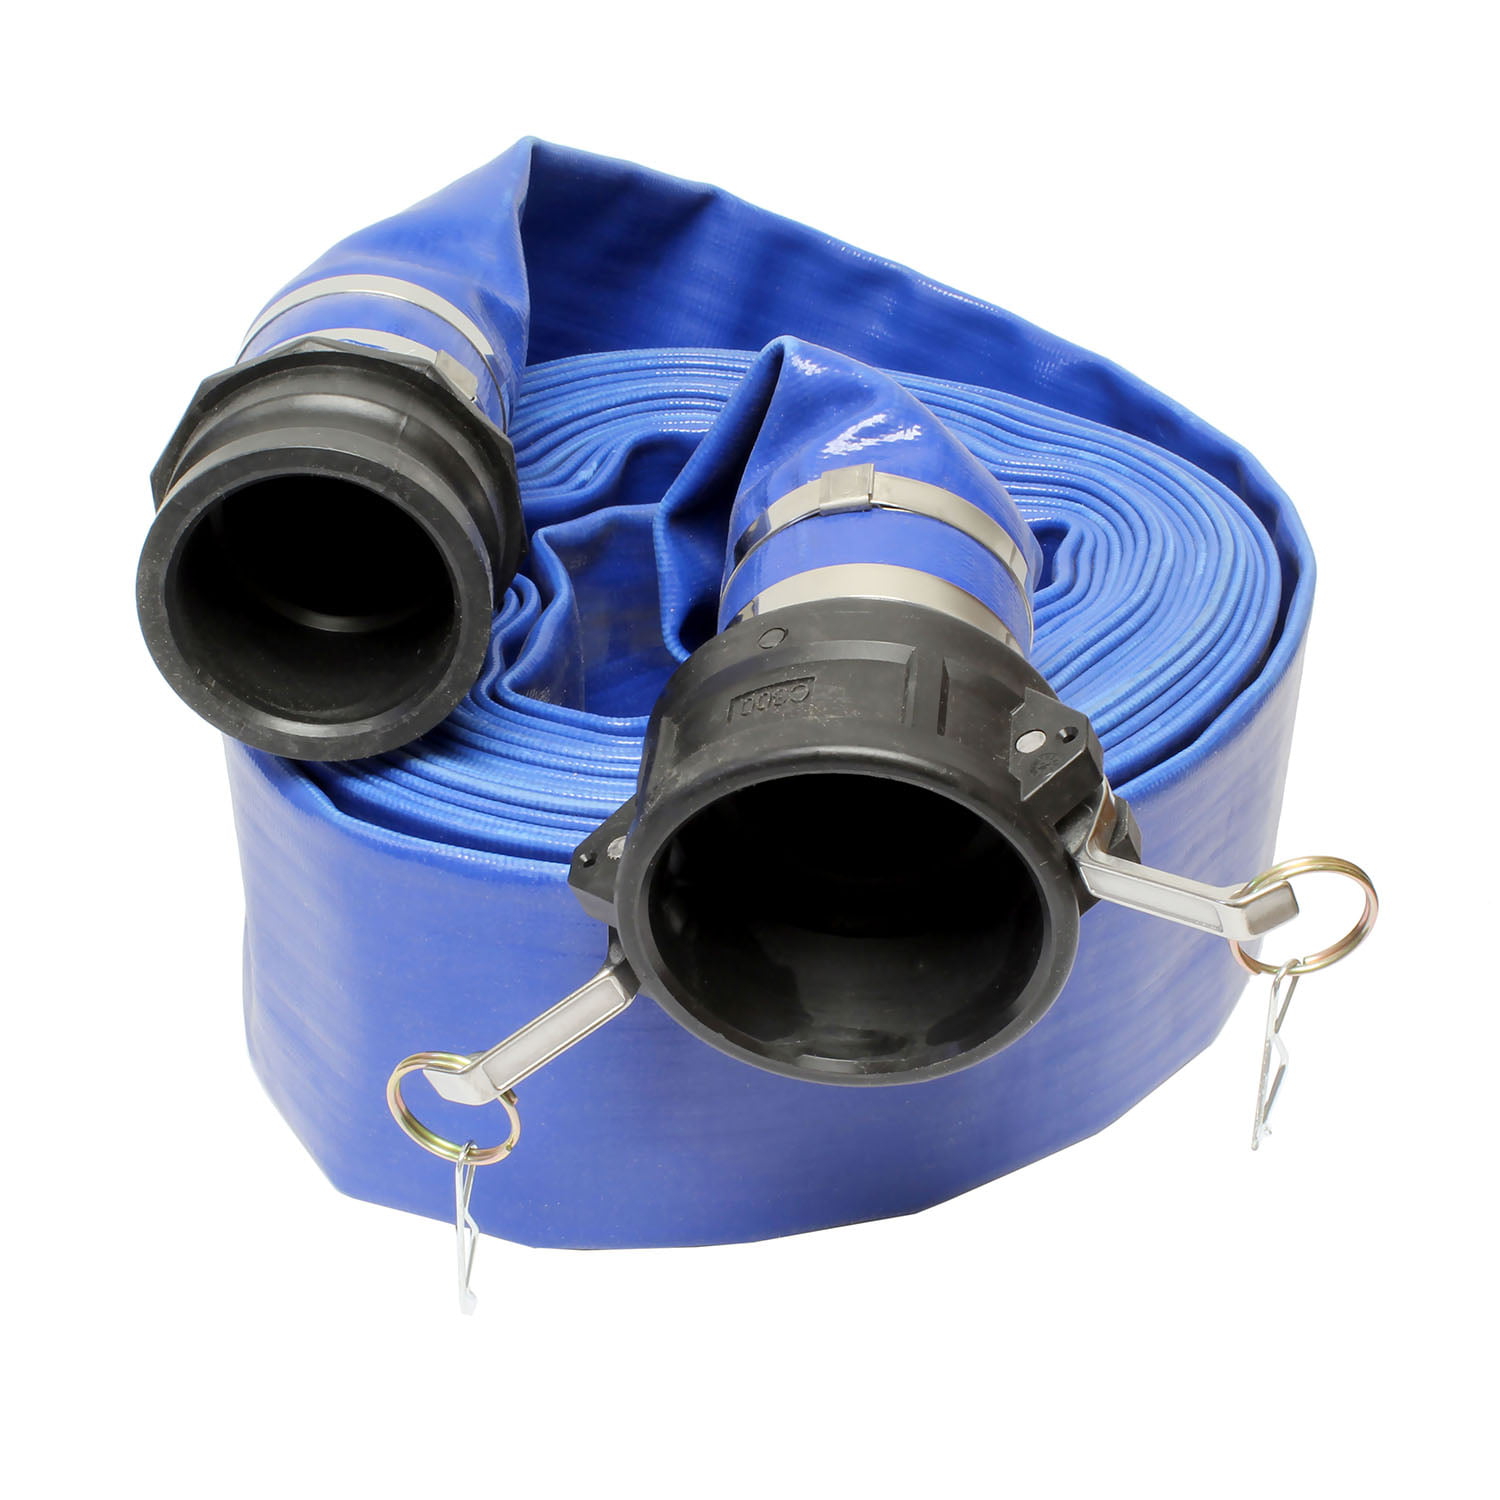 4 CLAMPS INCLUDED Schraiberpump 1-Inch by 200-Feet- General Purpose Reinforced PVC Lay-Flat Discharge and Backwash Hose 4 Bar Heavy Duty 